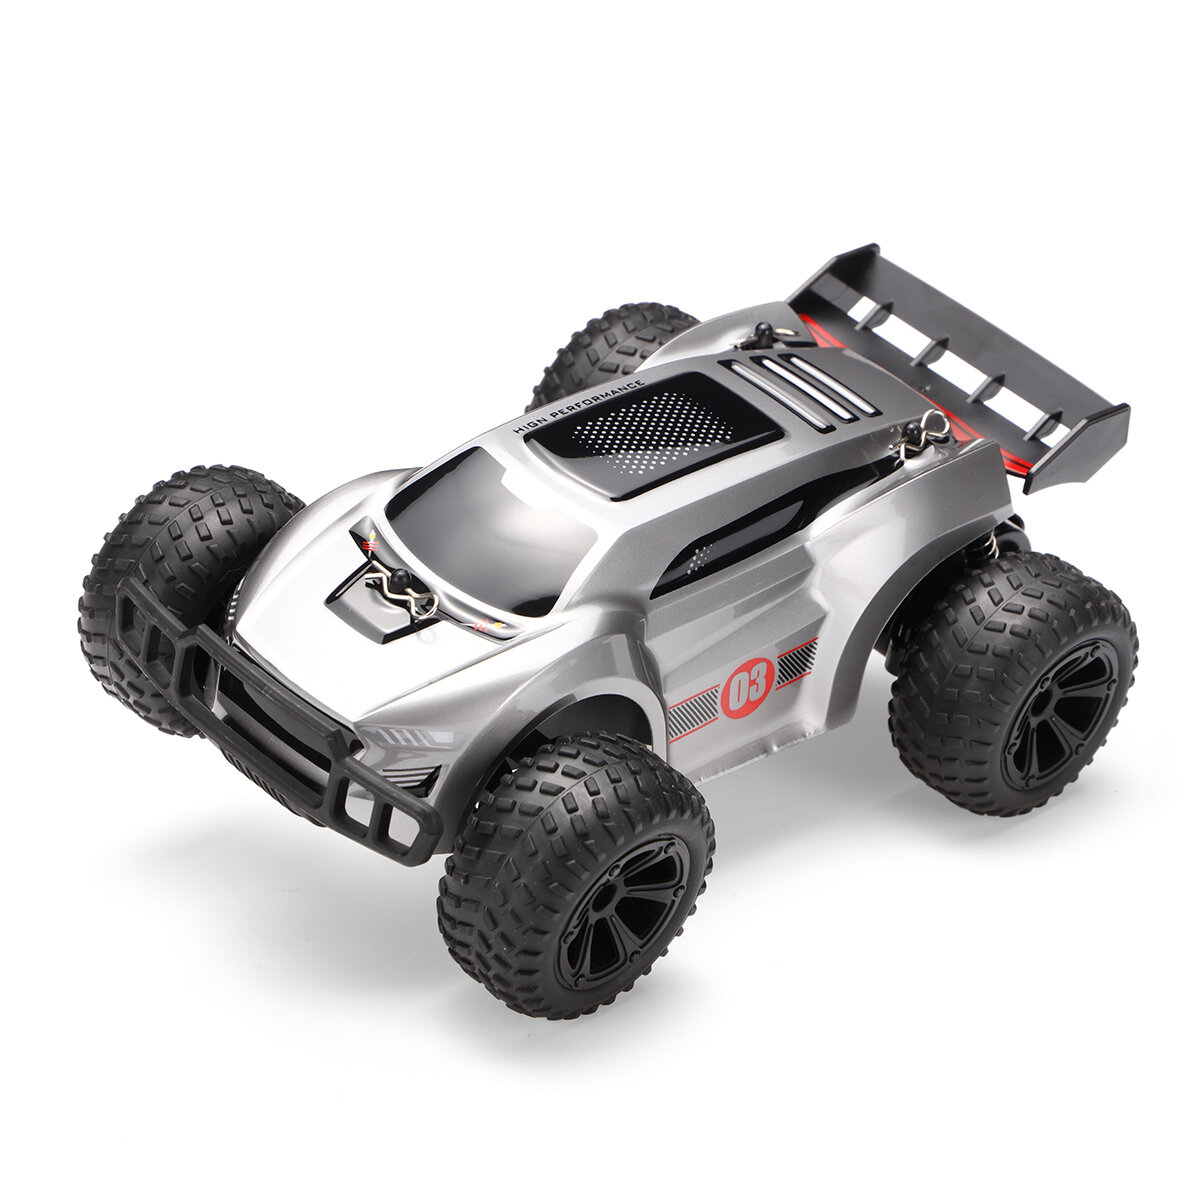 1/20 2.4G 15KM/H Remote Control Car Model RC Racing Car Toy for Kids Adults